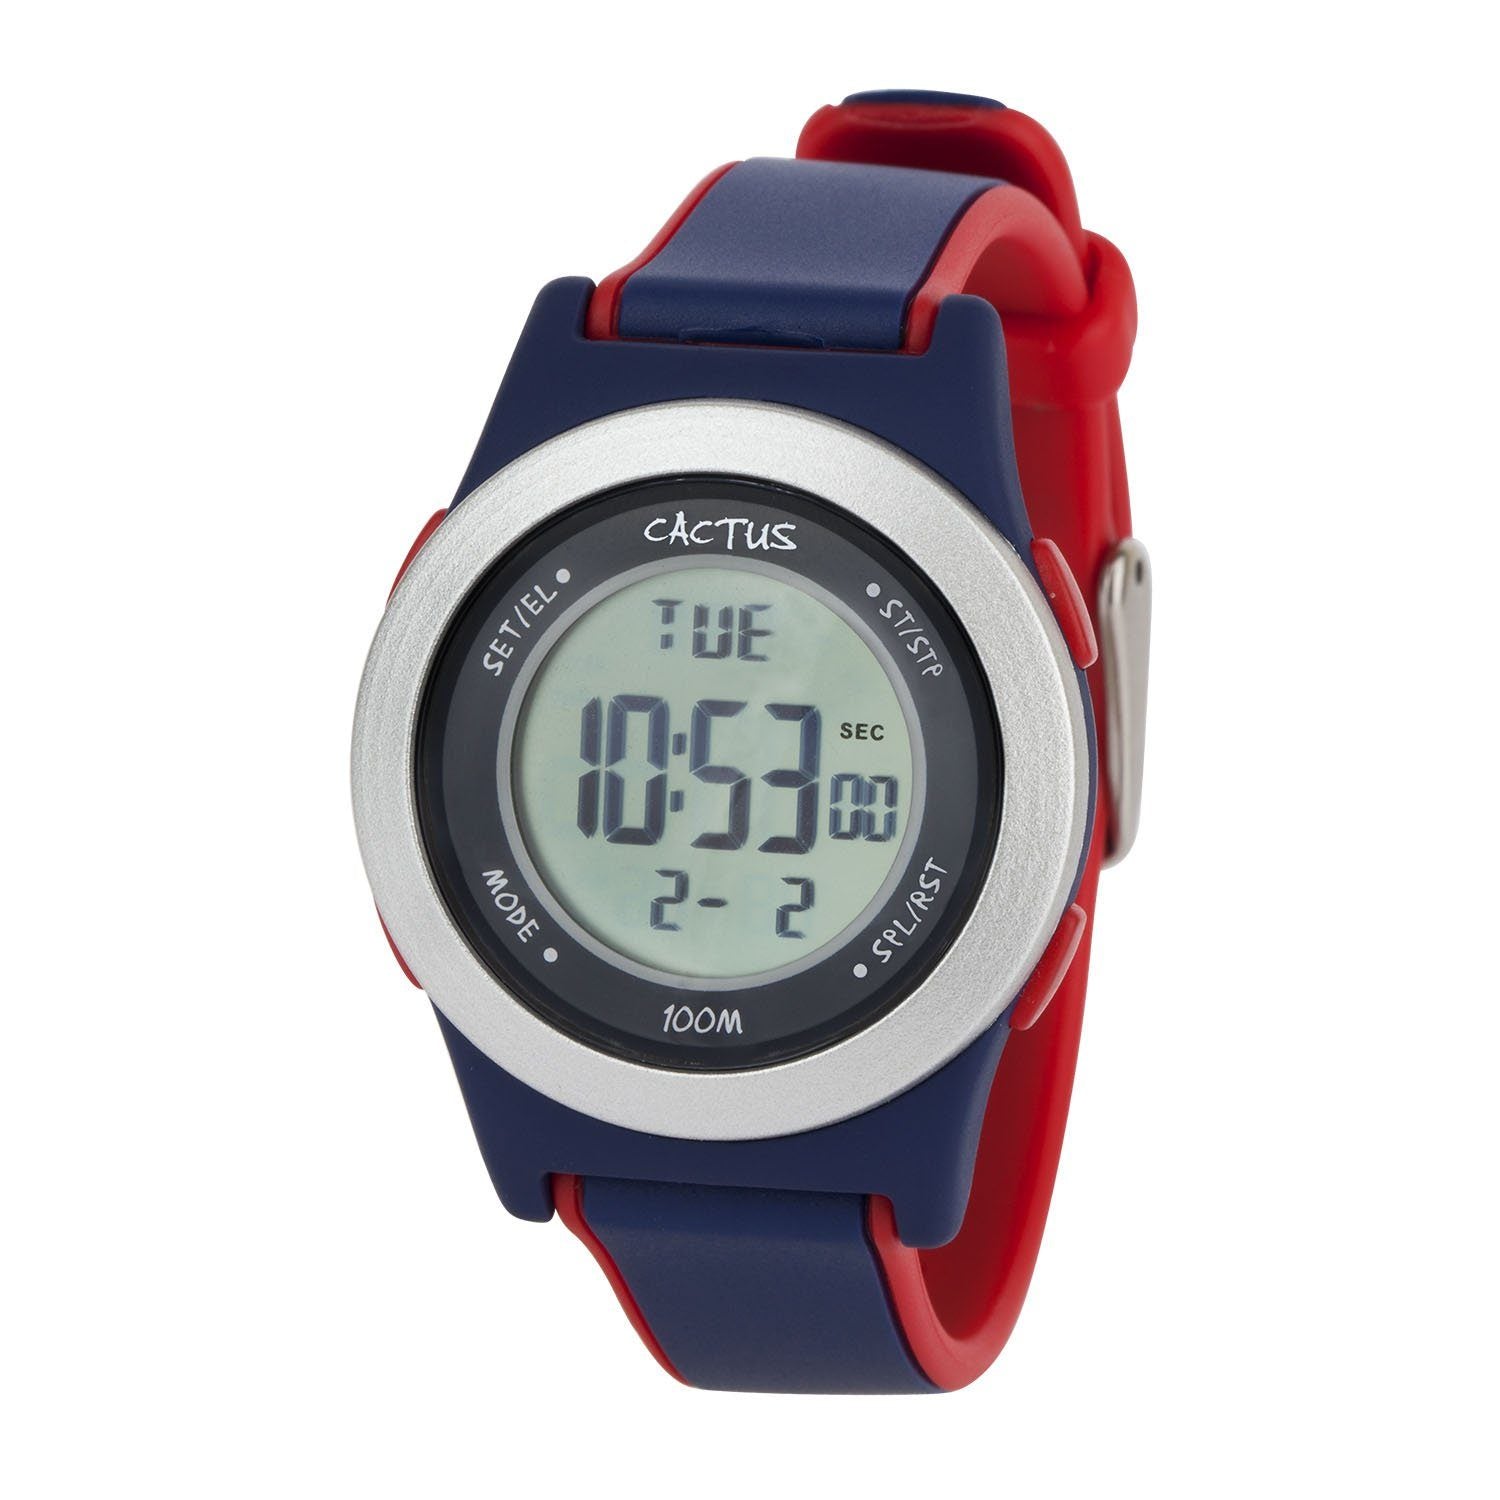 CACTUS Watches -Shine - Digital Kids Watch - Blue / Red  - CAC-125-M03